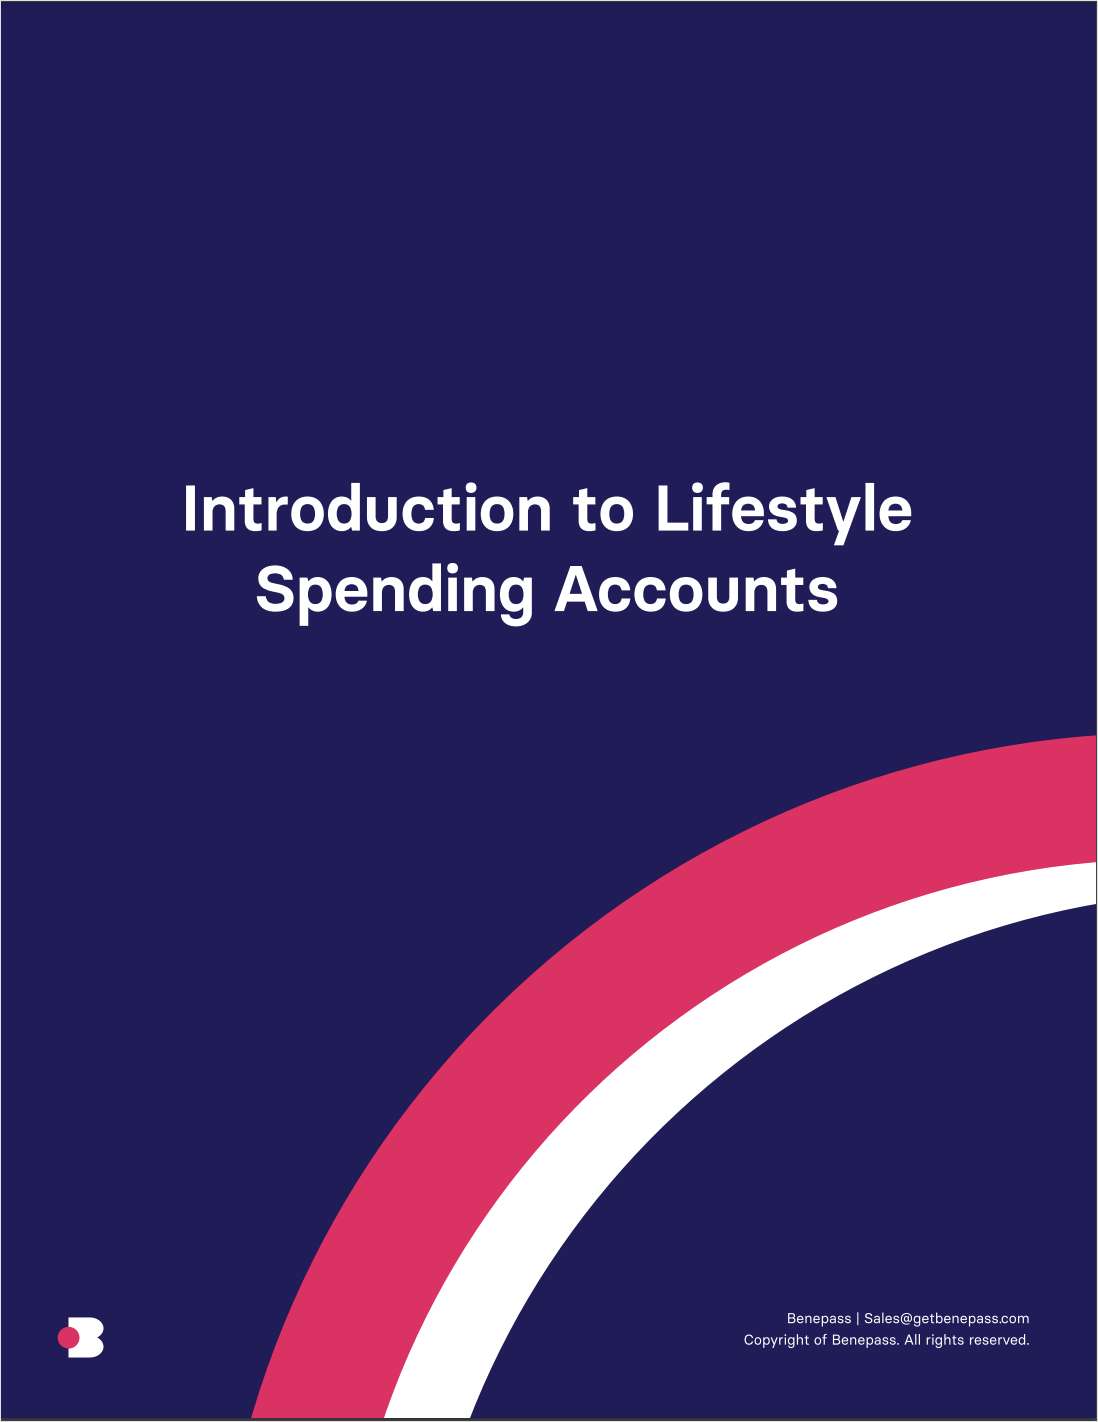 Introduction to Lifestyle Spending Accounts